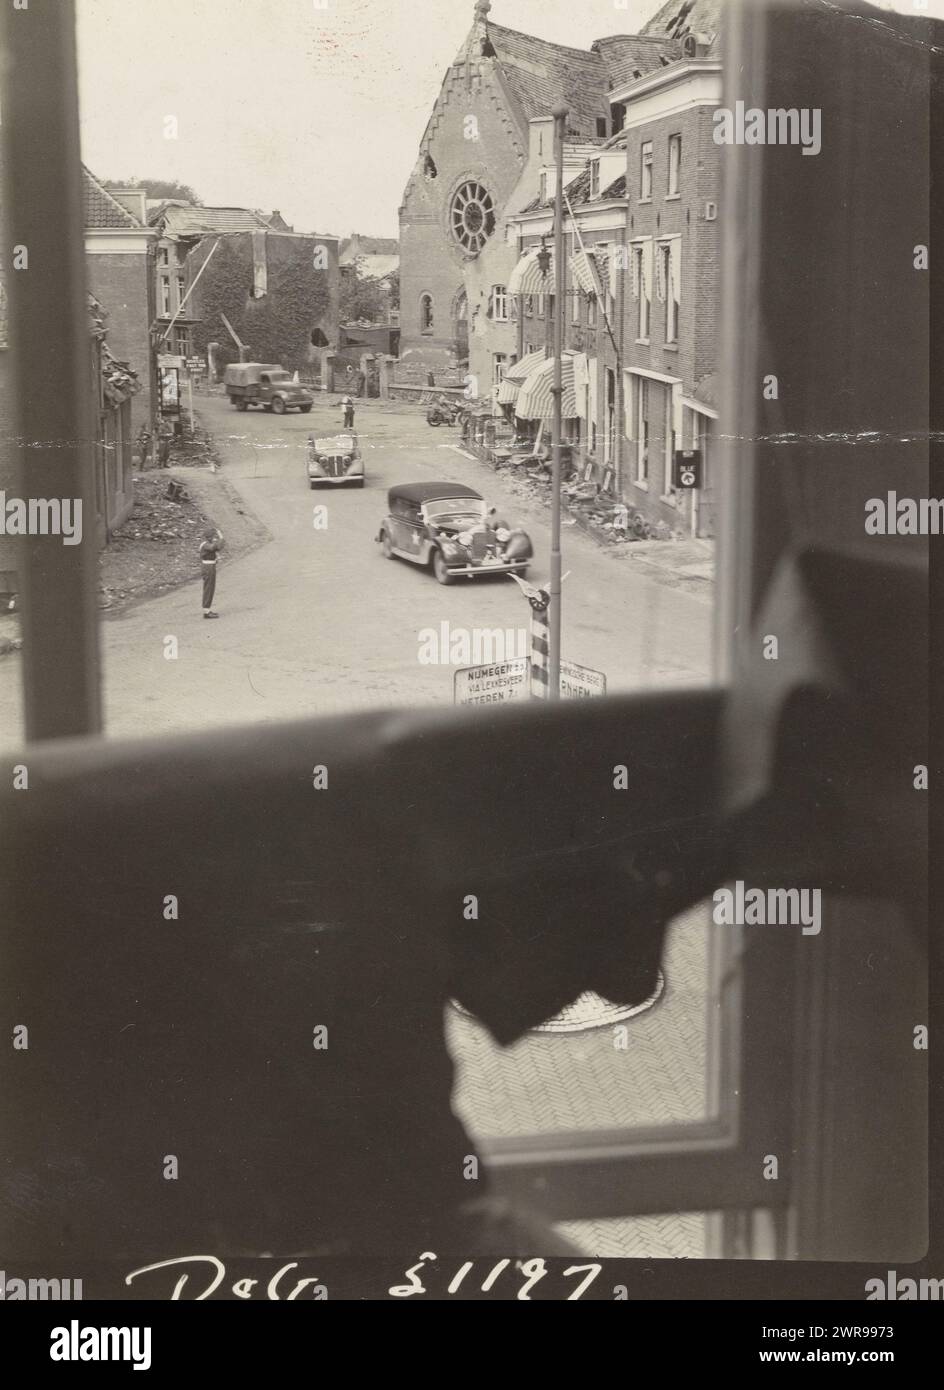 Destruction in a city, View of a street with destroyed buildings from a window. There are a few cars driving in the street and a suspect. English soldier seen saluting., anonymous, Netherlands, 1940 - 1950, photographic support, height 11 cm × width 8 cm, photograph Stock Photo